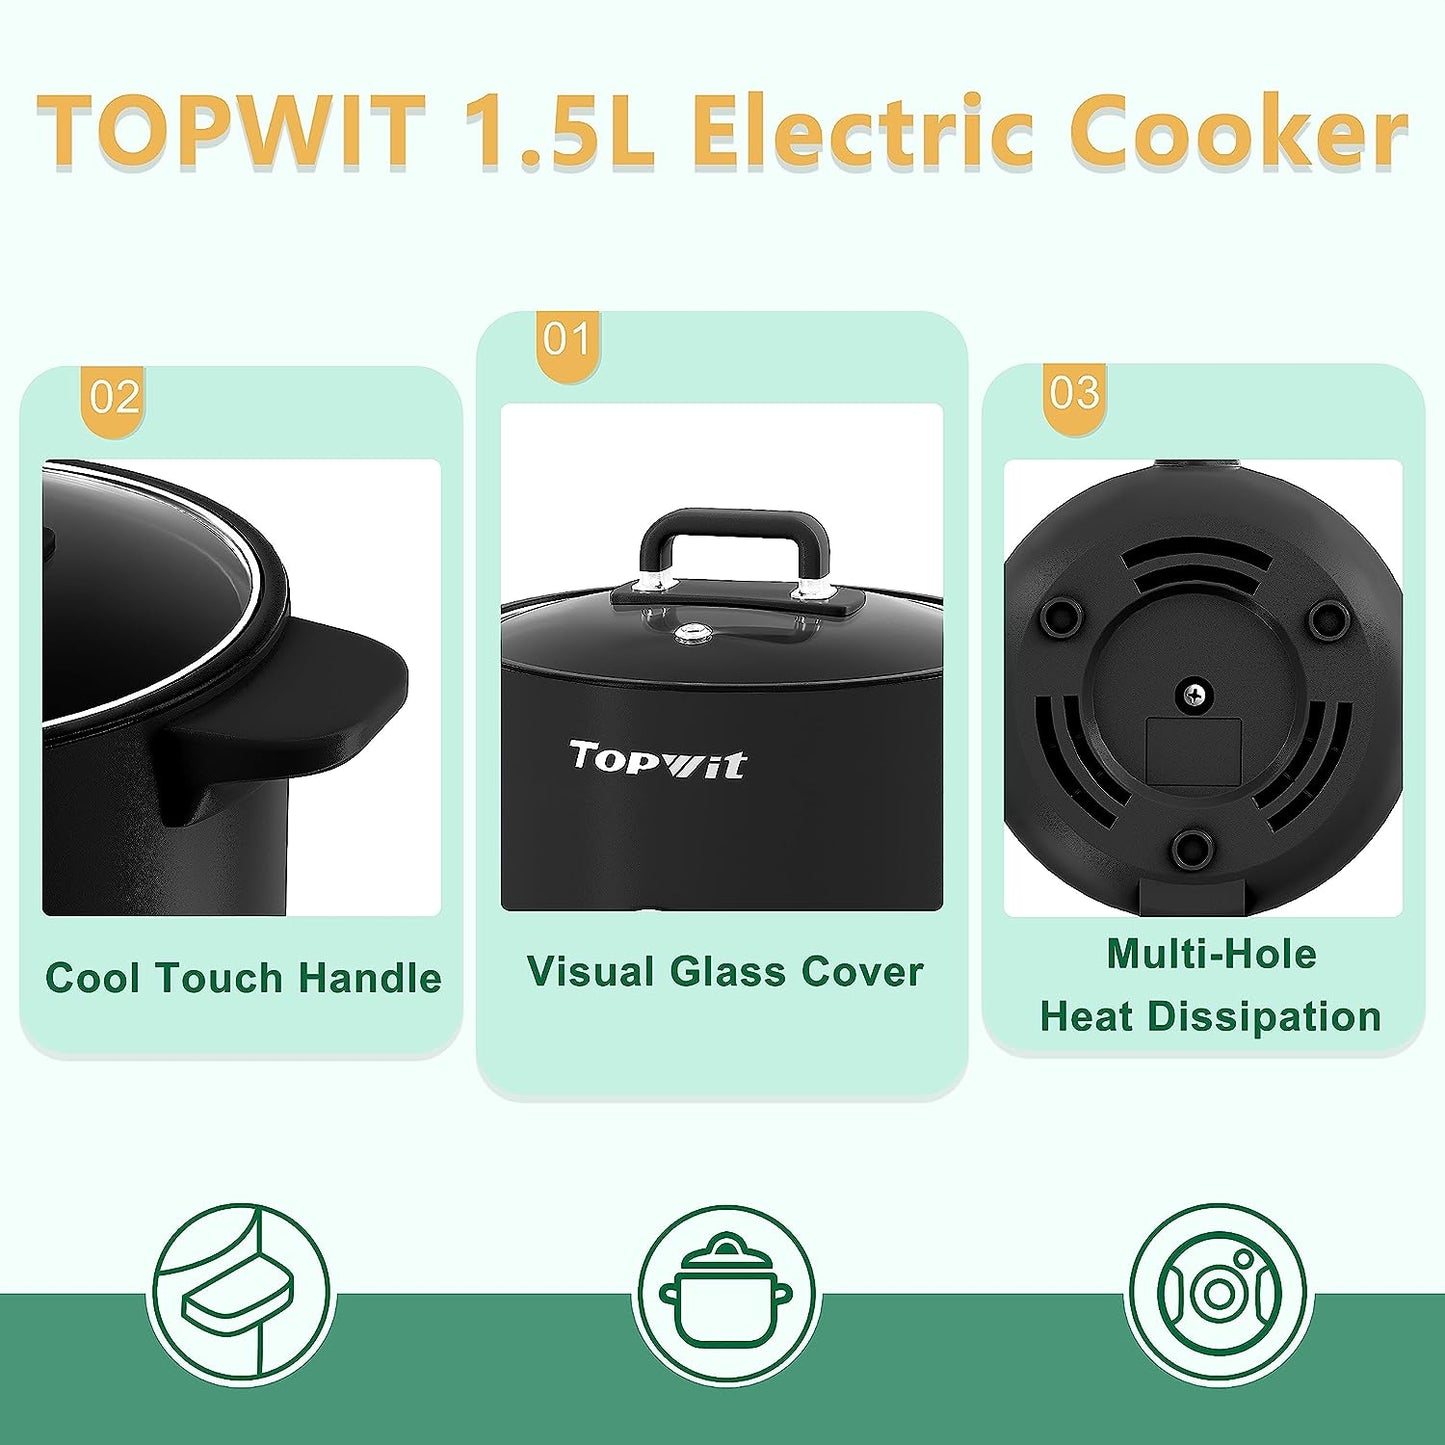 First-Class Electric Pot, 1.5L Non-stick Ramen Cooker, Multi-Function Hot Pot Electric for Pasta, Noodles, Steak, Egg, Electric Cooker with Dual Power Control, Over-Heating and Boil Dry Protection, Dorm Room Essentials, Green